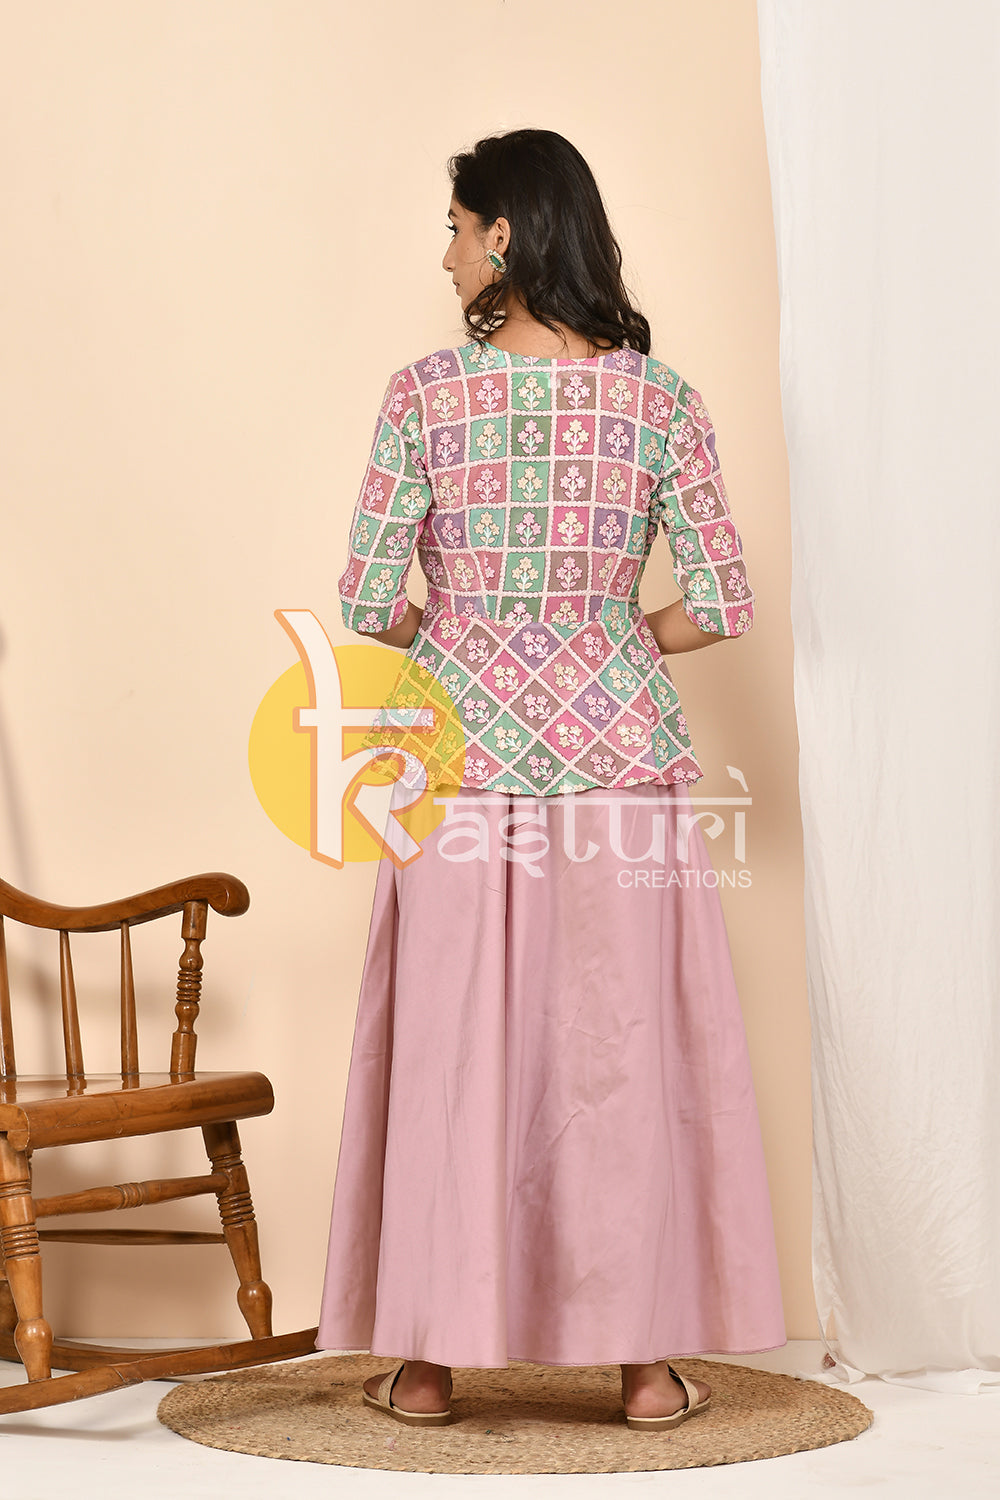 Mauve and multicolored top with skirt dress